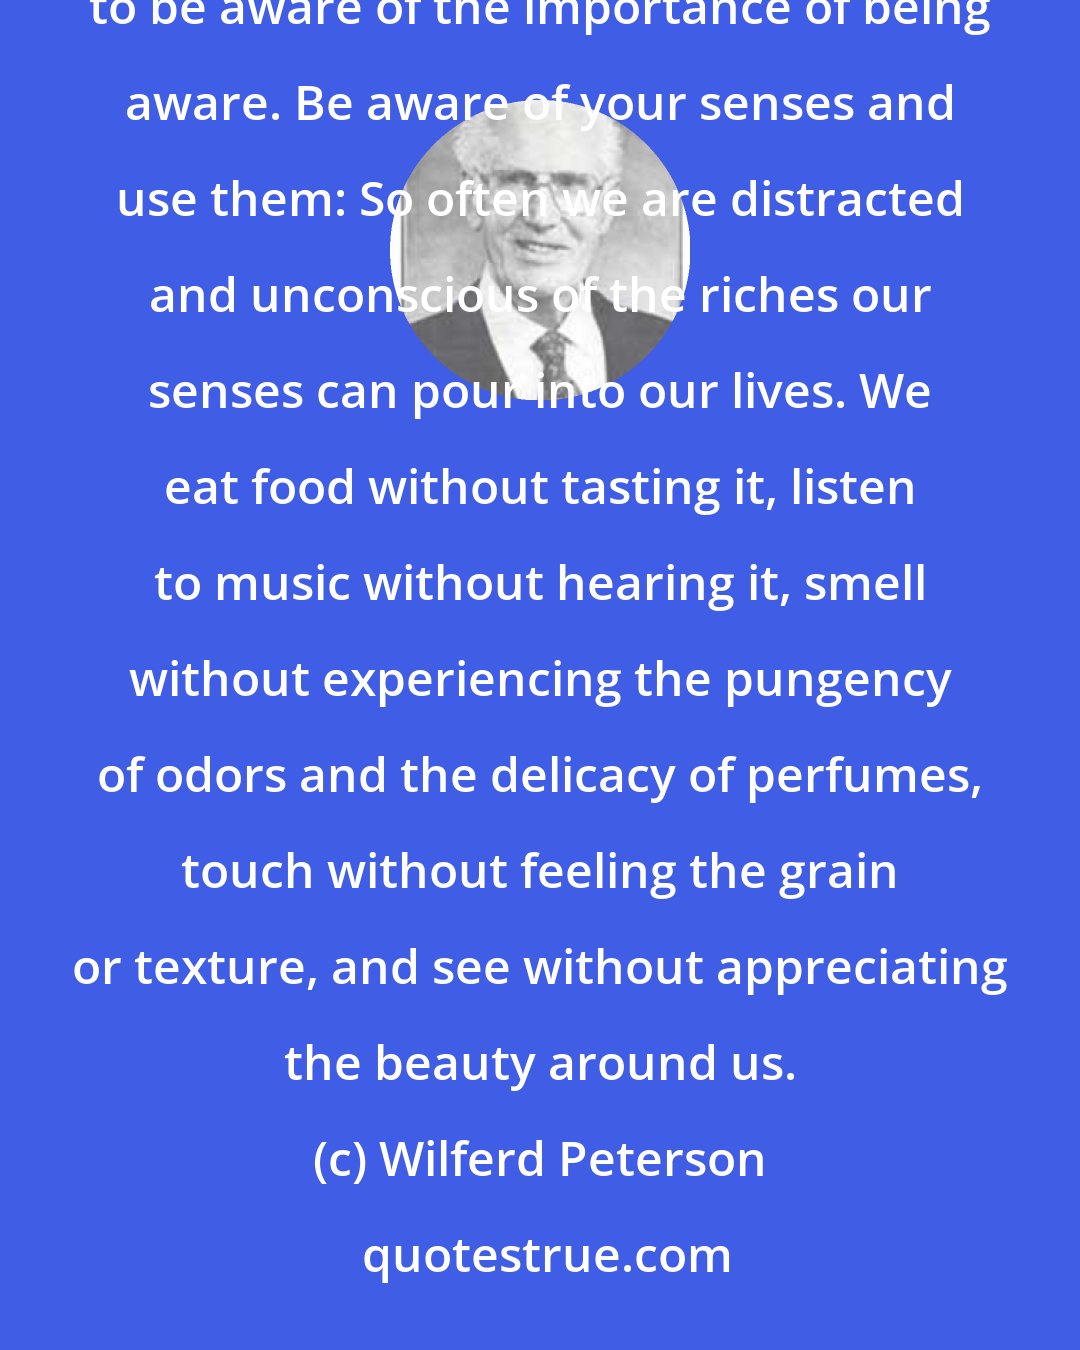 Wilferd Peterson: A person is alive only to the degree that he or she is aware. To make the most of life we must constantly strive to be aware of the importance of being aware. Be aware of your senses and use them: So often we are distracted and unconscious of the riches our senses can pour into our lives. We eat food without tasting it, listen to music without hearing it, smell without experiencing the pungency of odors and the delicacy of perfumes, touch without feeling the grain or texture, and see without appreciating the beauty around us.